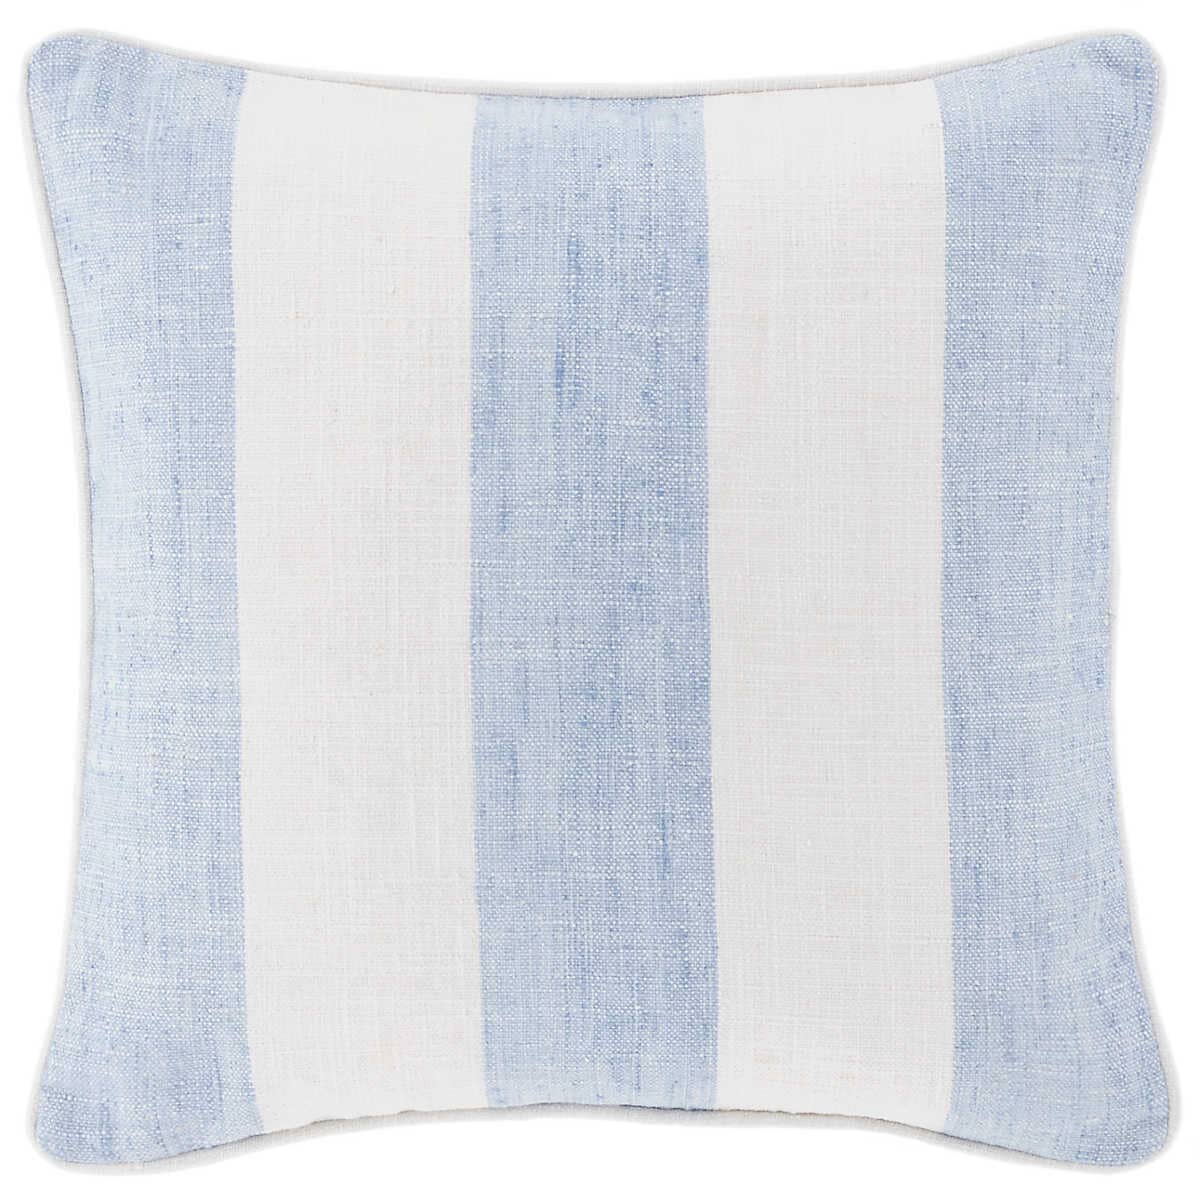 Awning Stripe French Blue Indoor/Outdoor Pillow with Insert Pillows 